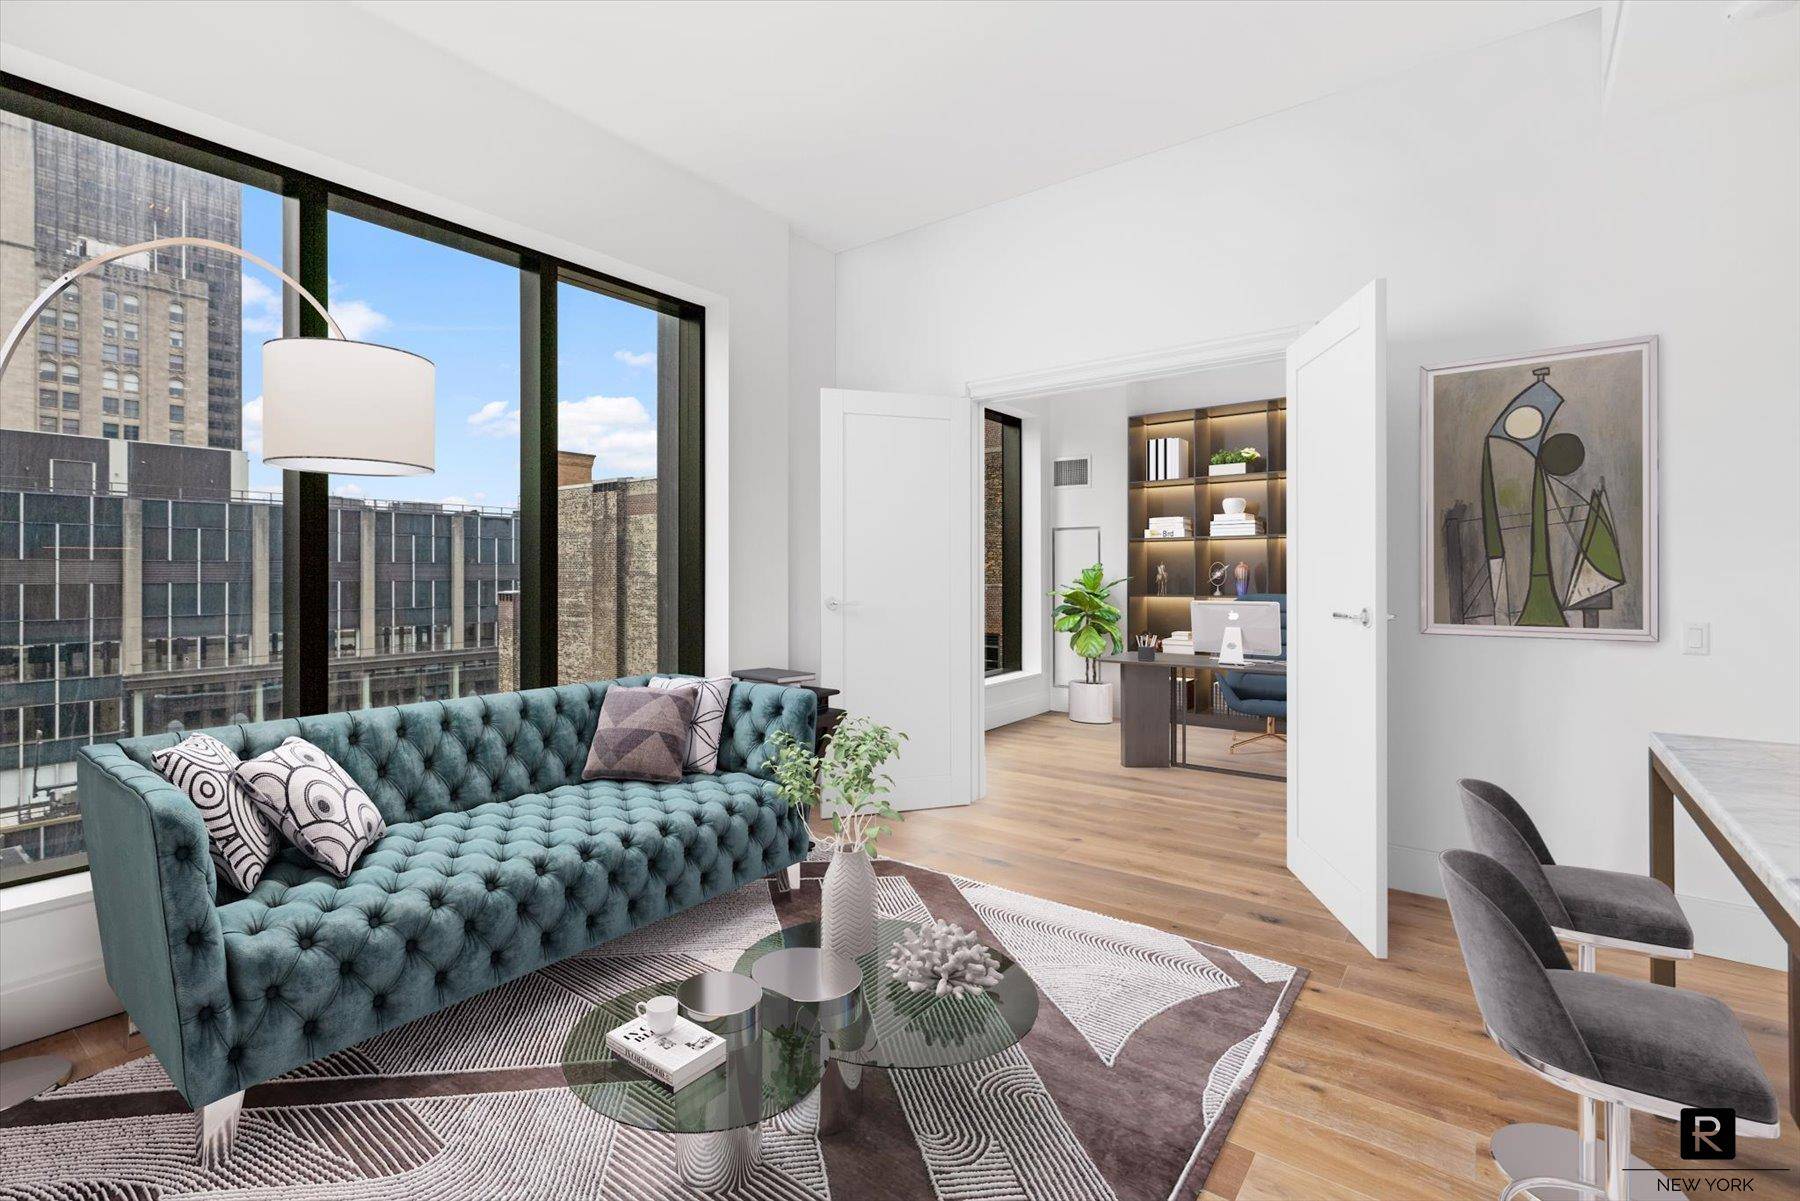 Located at 30 East 29th Street, in the picturesque and historic Rose Hill district of NoMad, this classic and high end new building provides three full floors of modern amenities ...